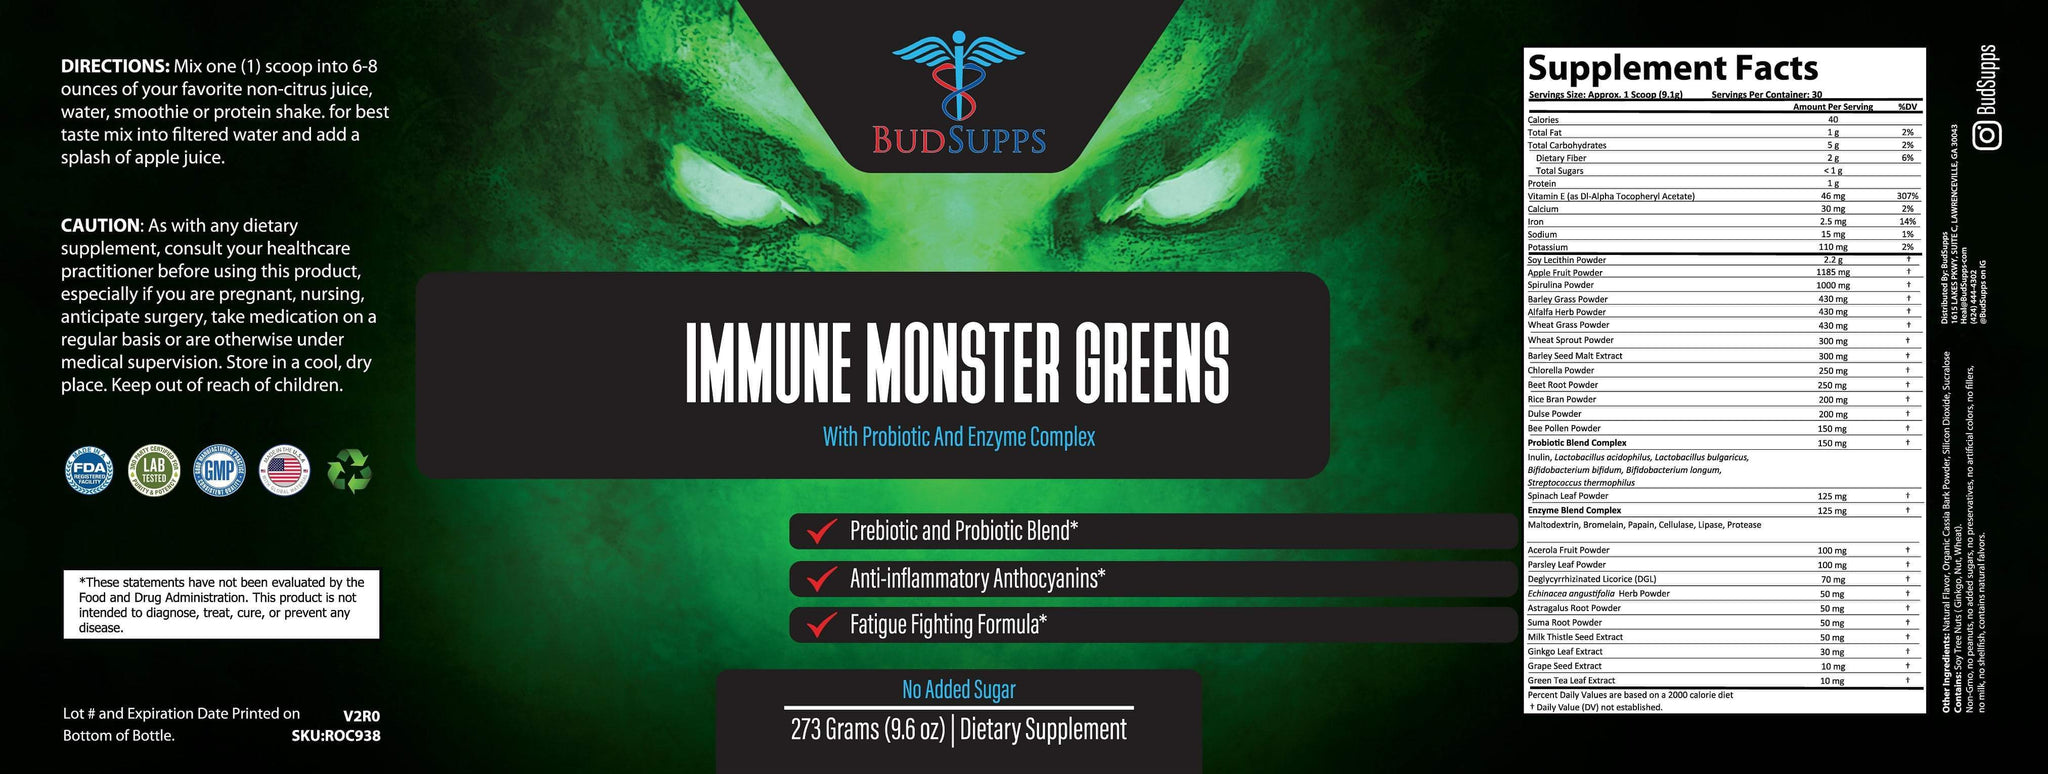 Monster Greens (With Probiotic and Enzyme Complex)